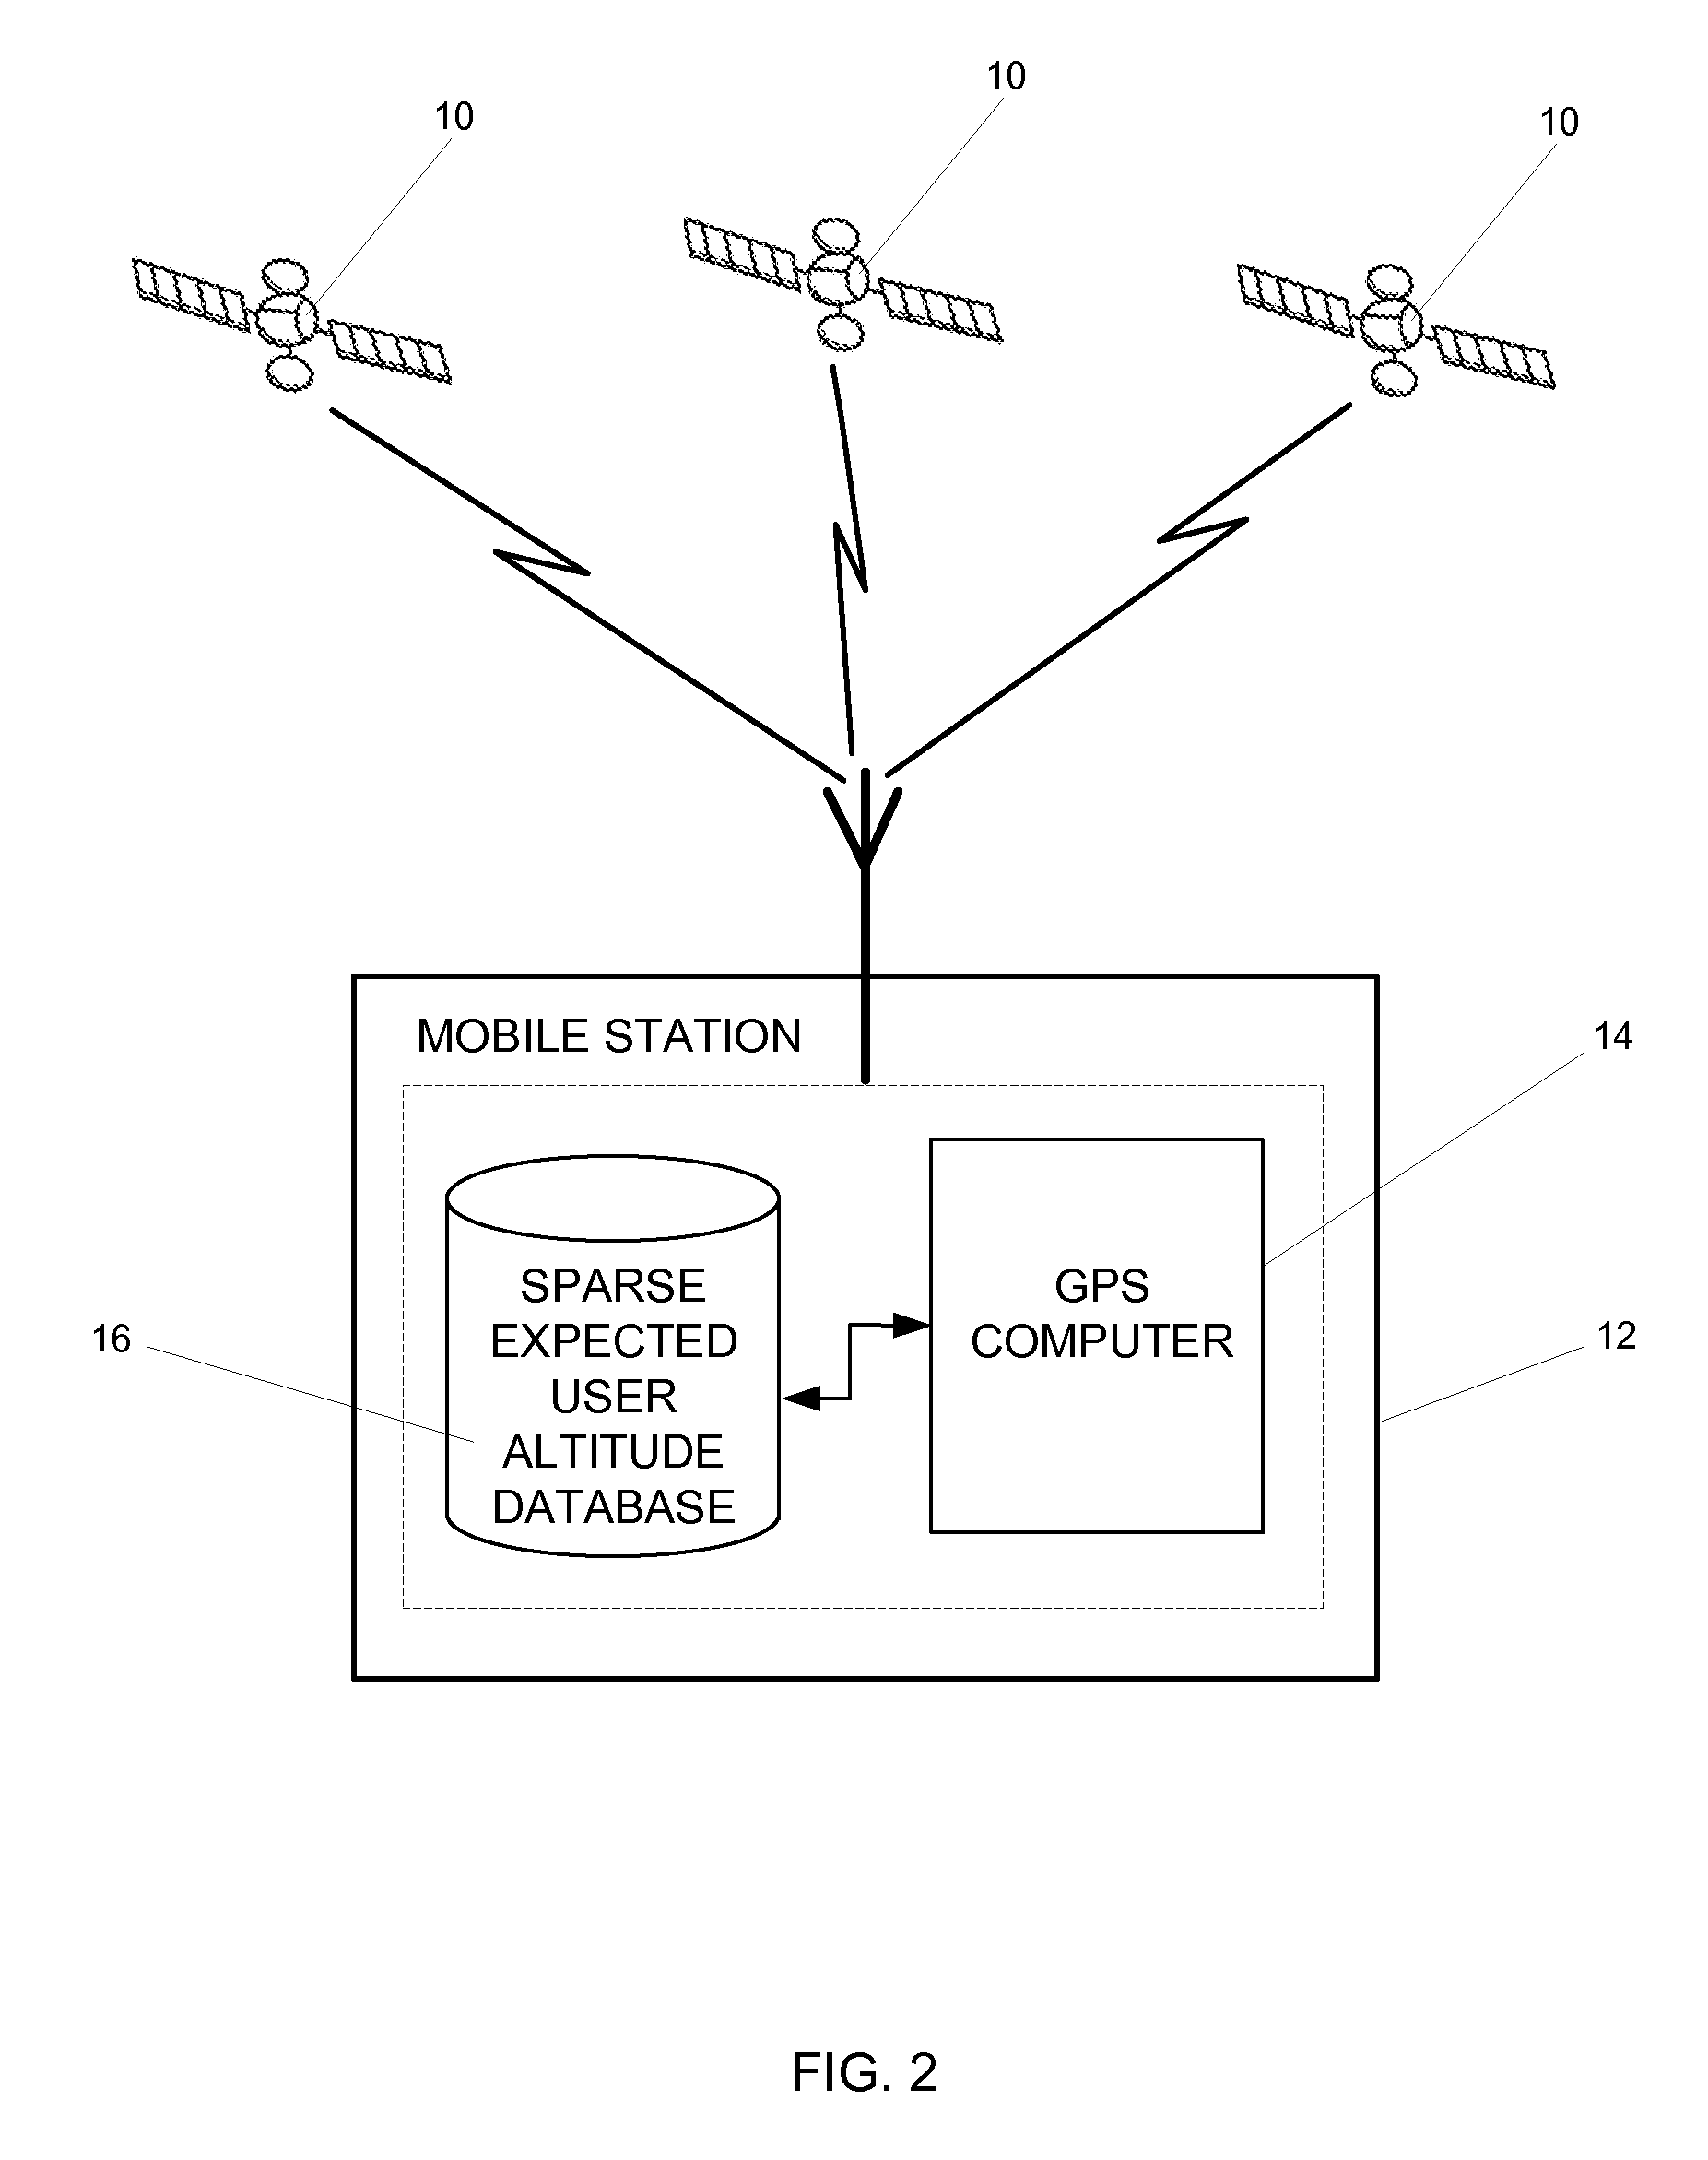 Efficient use of expected user altitude data to aid in determining a position of a mobile station